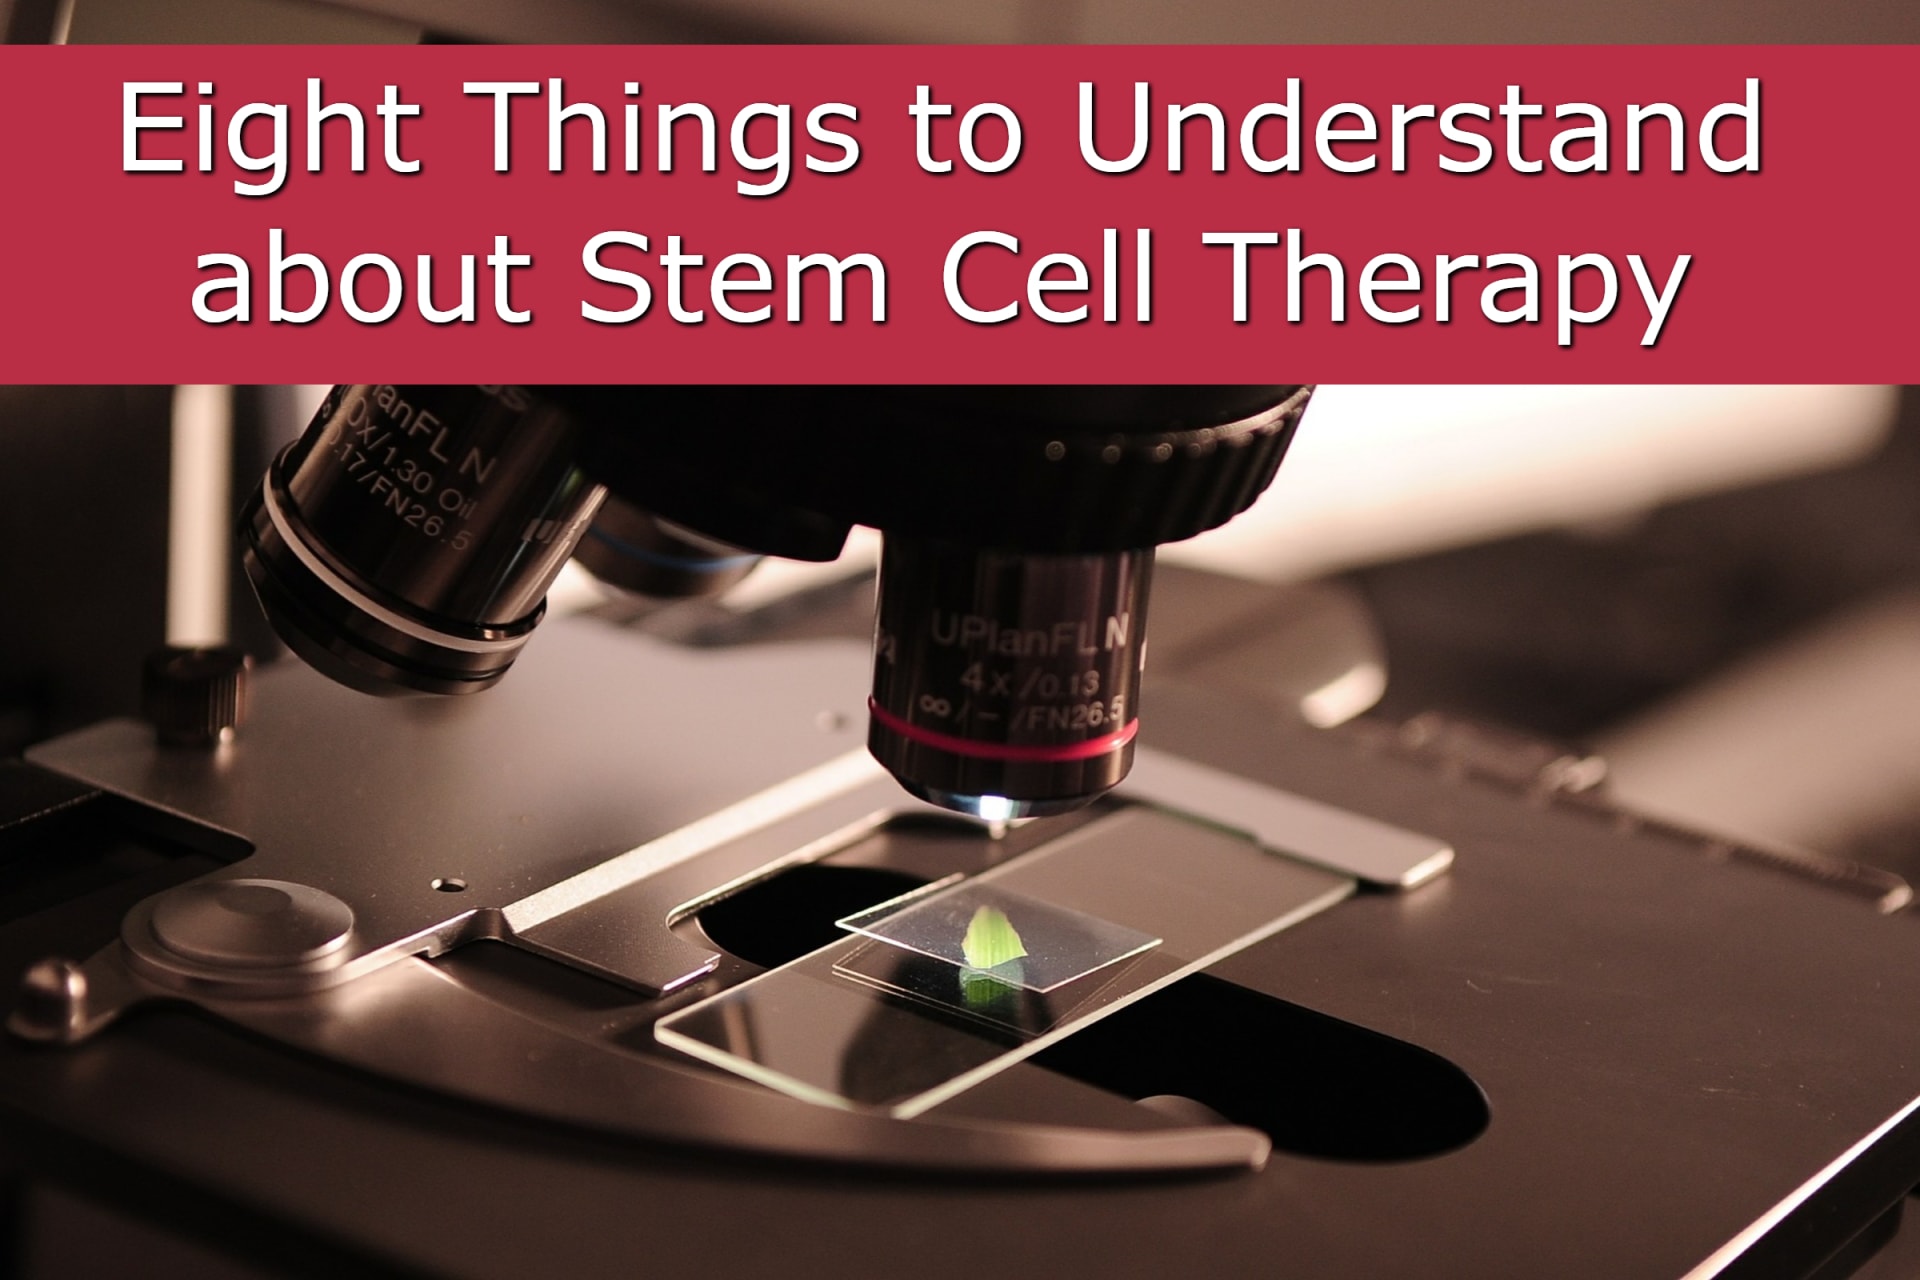 Eight Things to Understand about Stem Cell Therapy